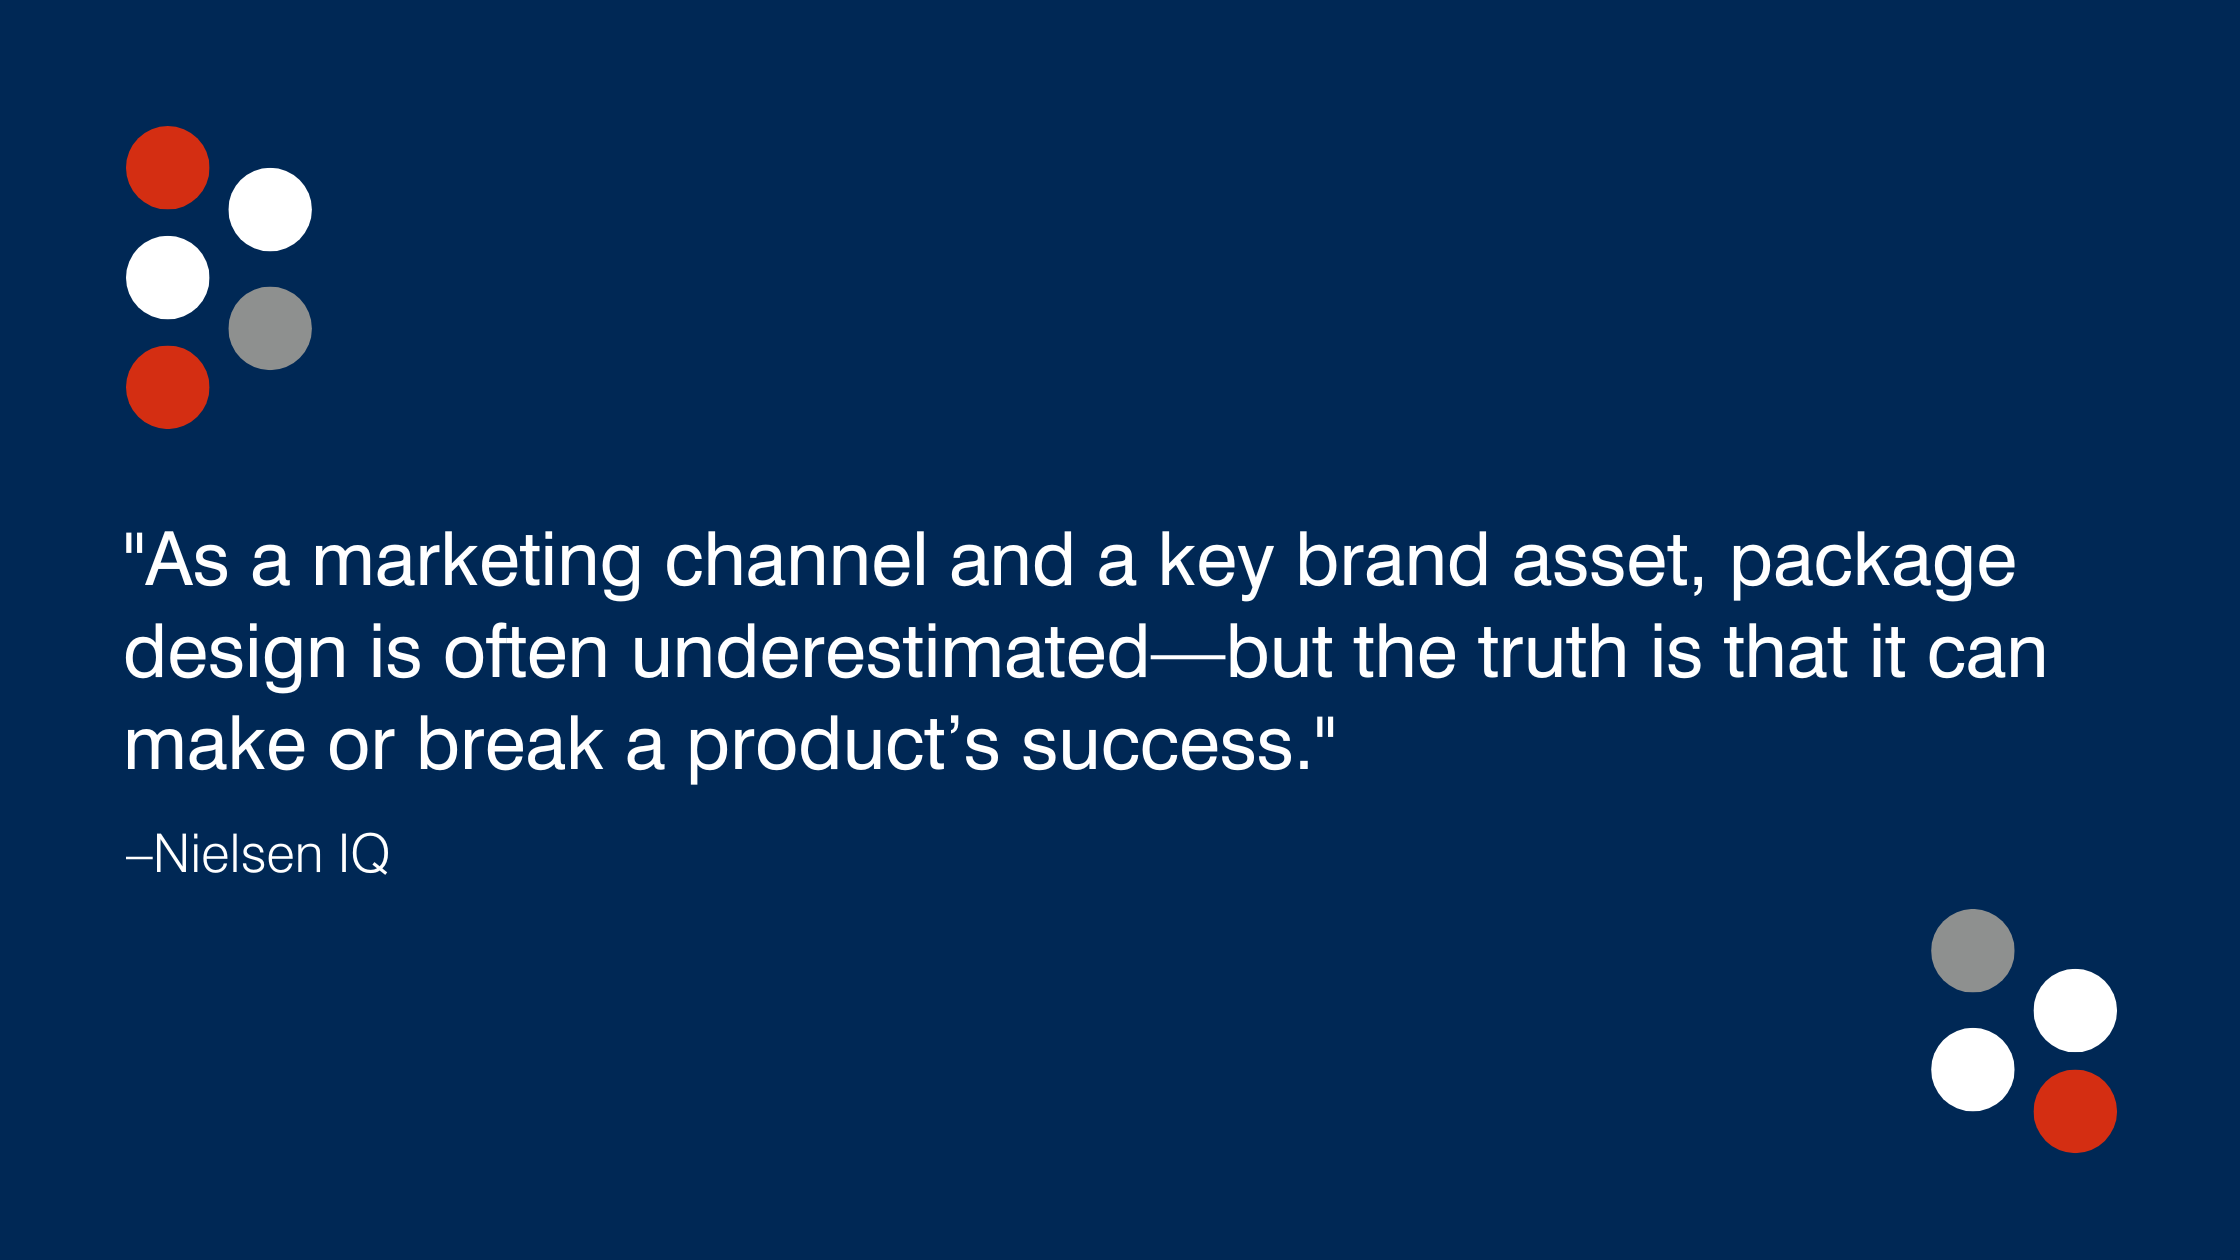  Pulled quote. “As a marketing channel and a key brand asset, package design is often underestimated—but the truth is that it can make or break a product’s success.]
